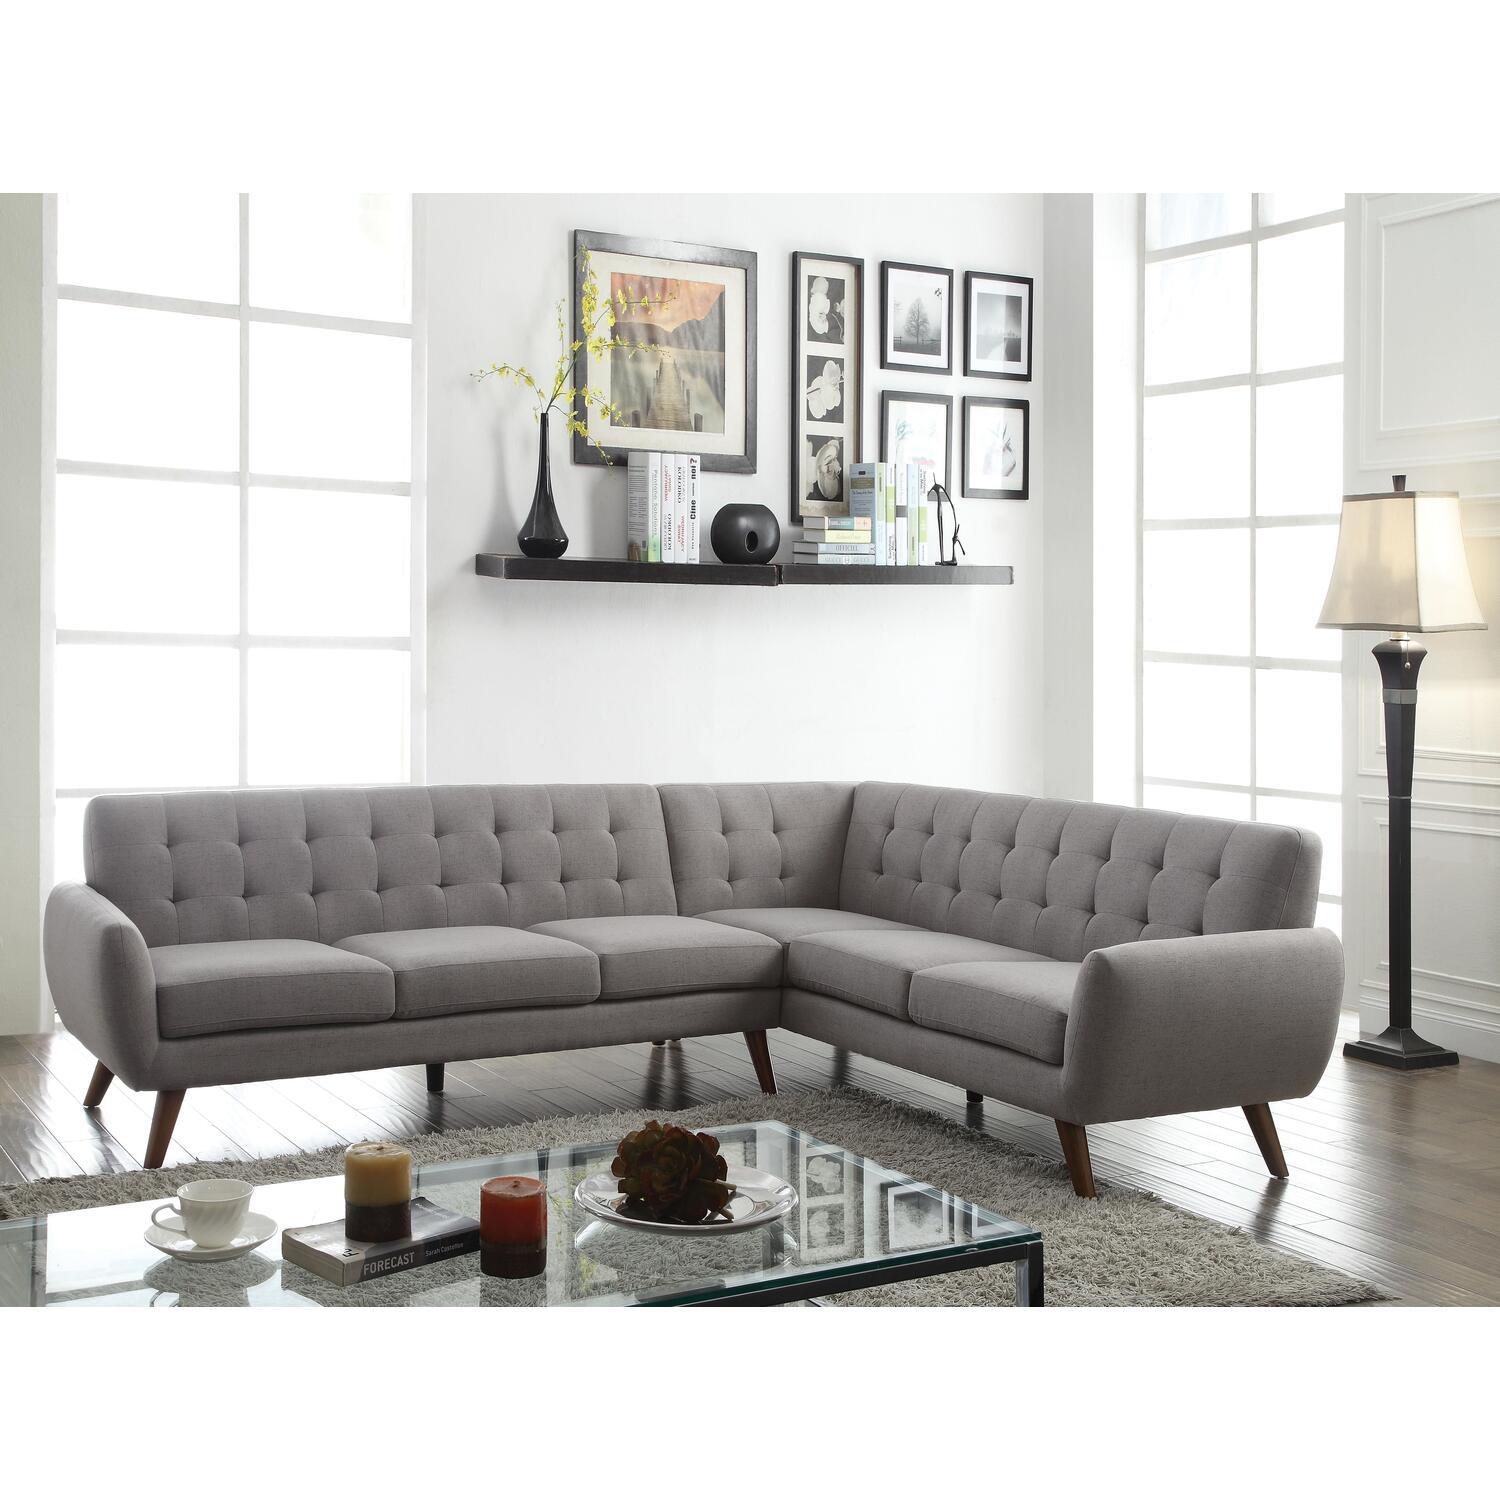 ACME Essick Mid Century L-Shaped Sectional Sofa in Light Gray Linen - image 1 of 2